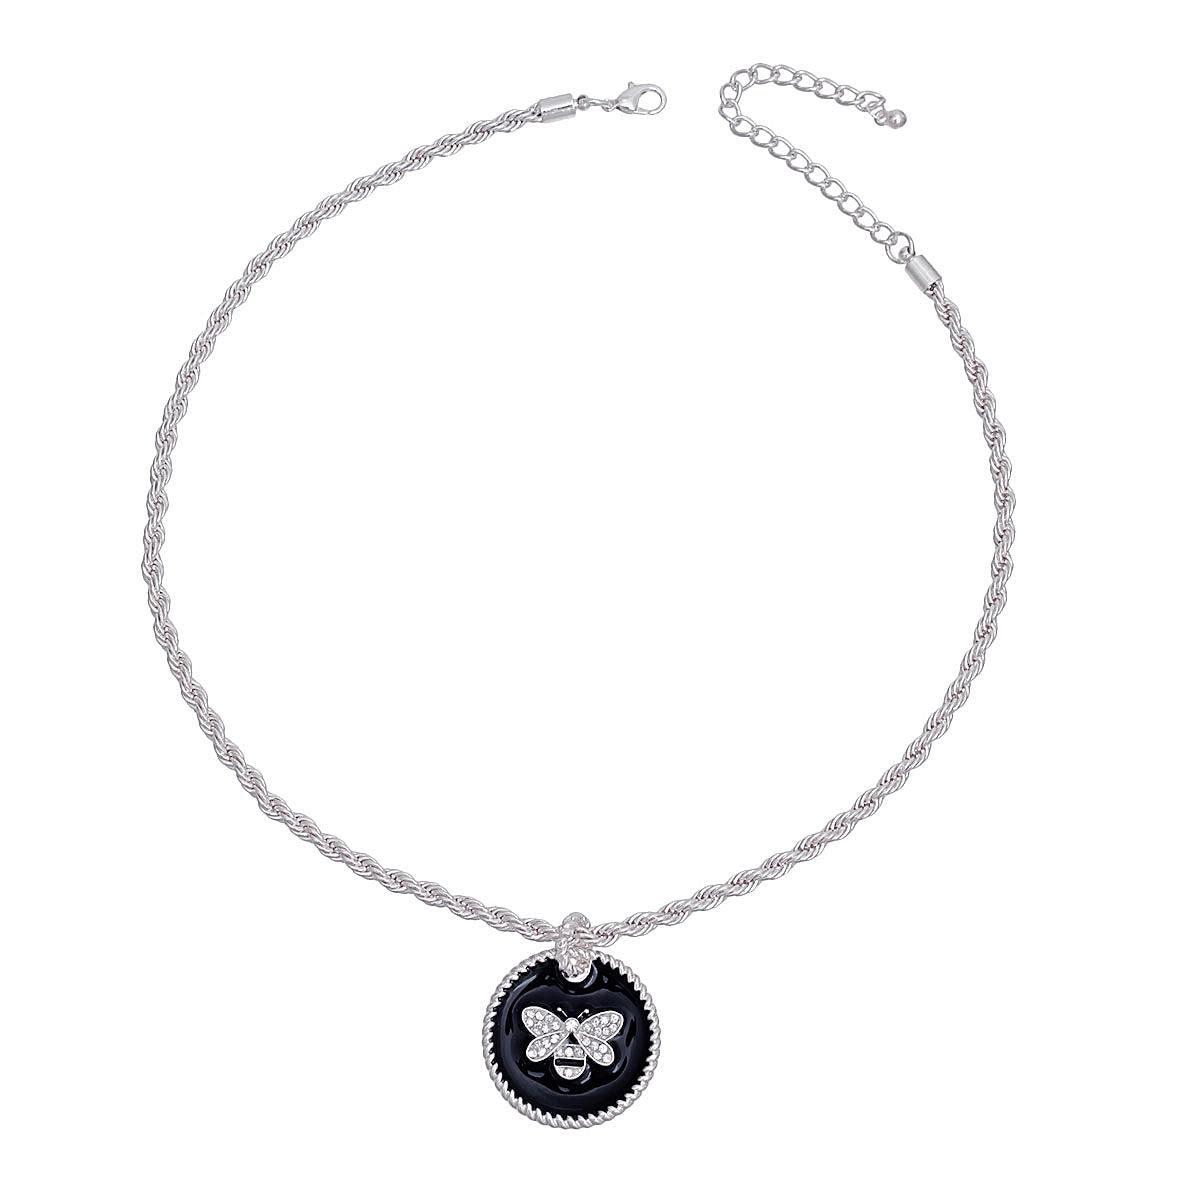 Stunning Black Silver Bee Necklace - Shop Fashion Jewelry Now